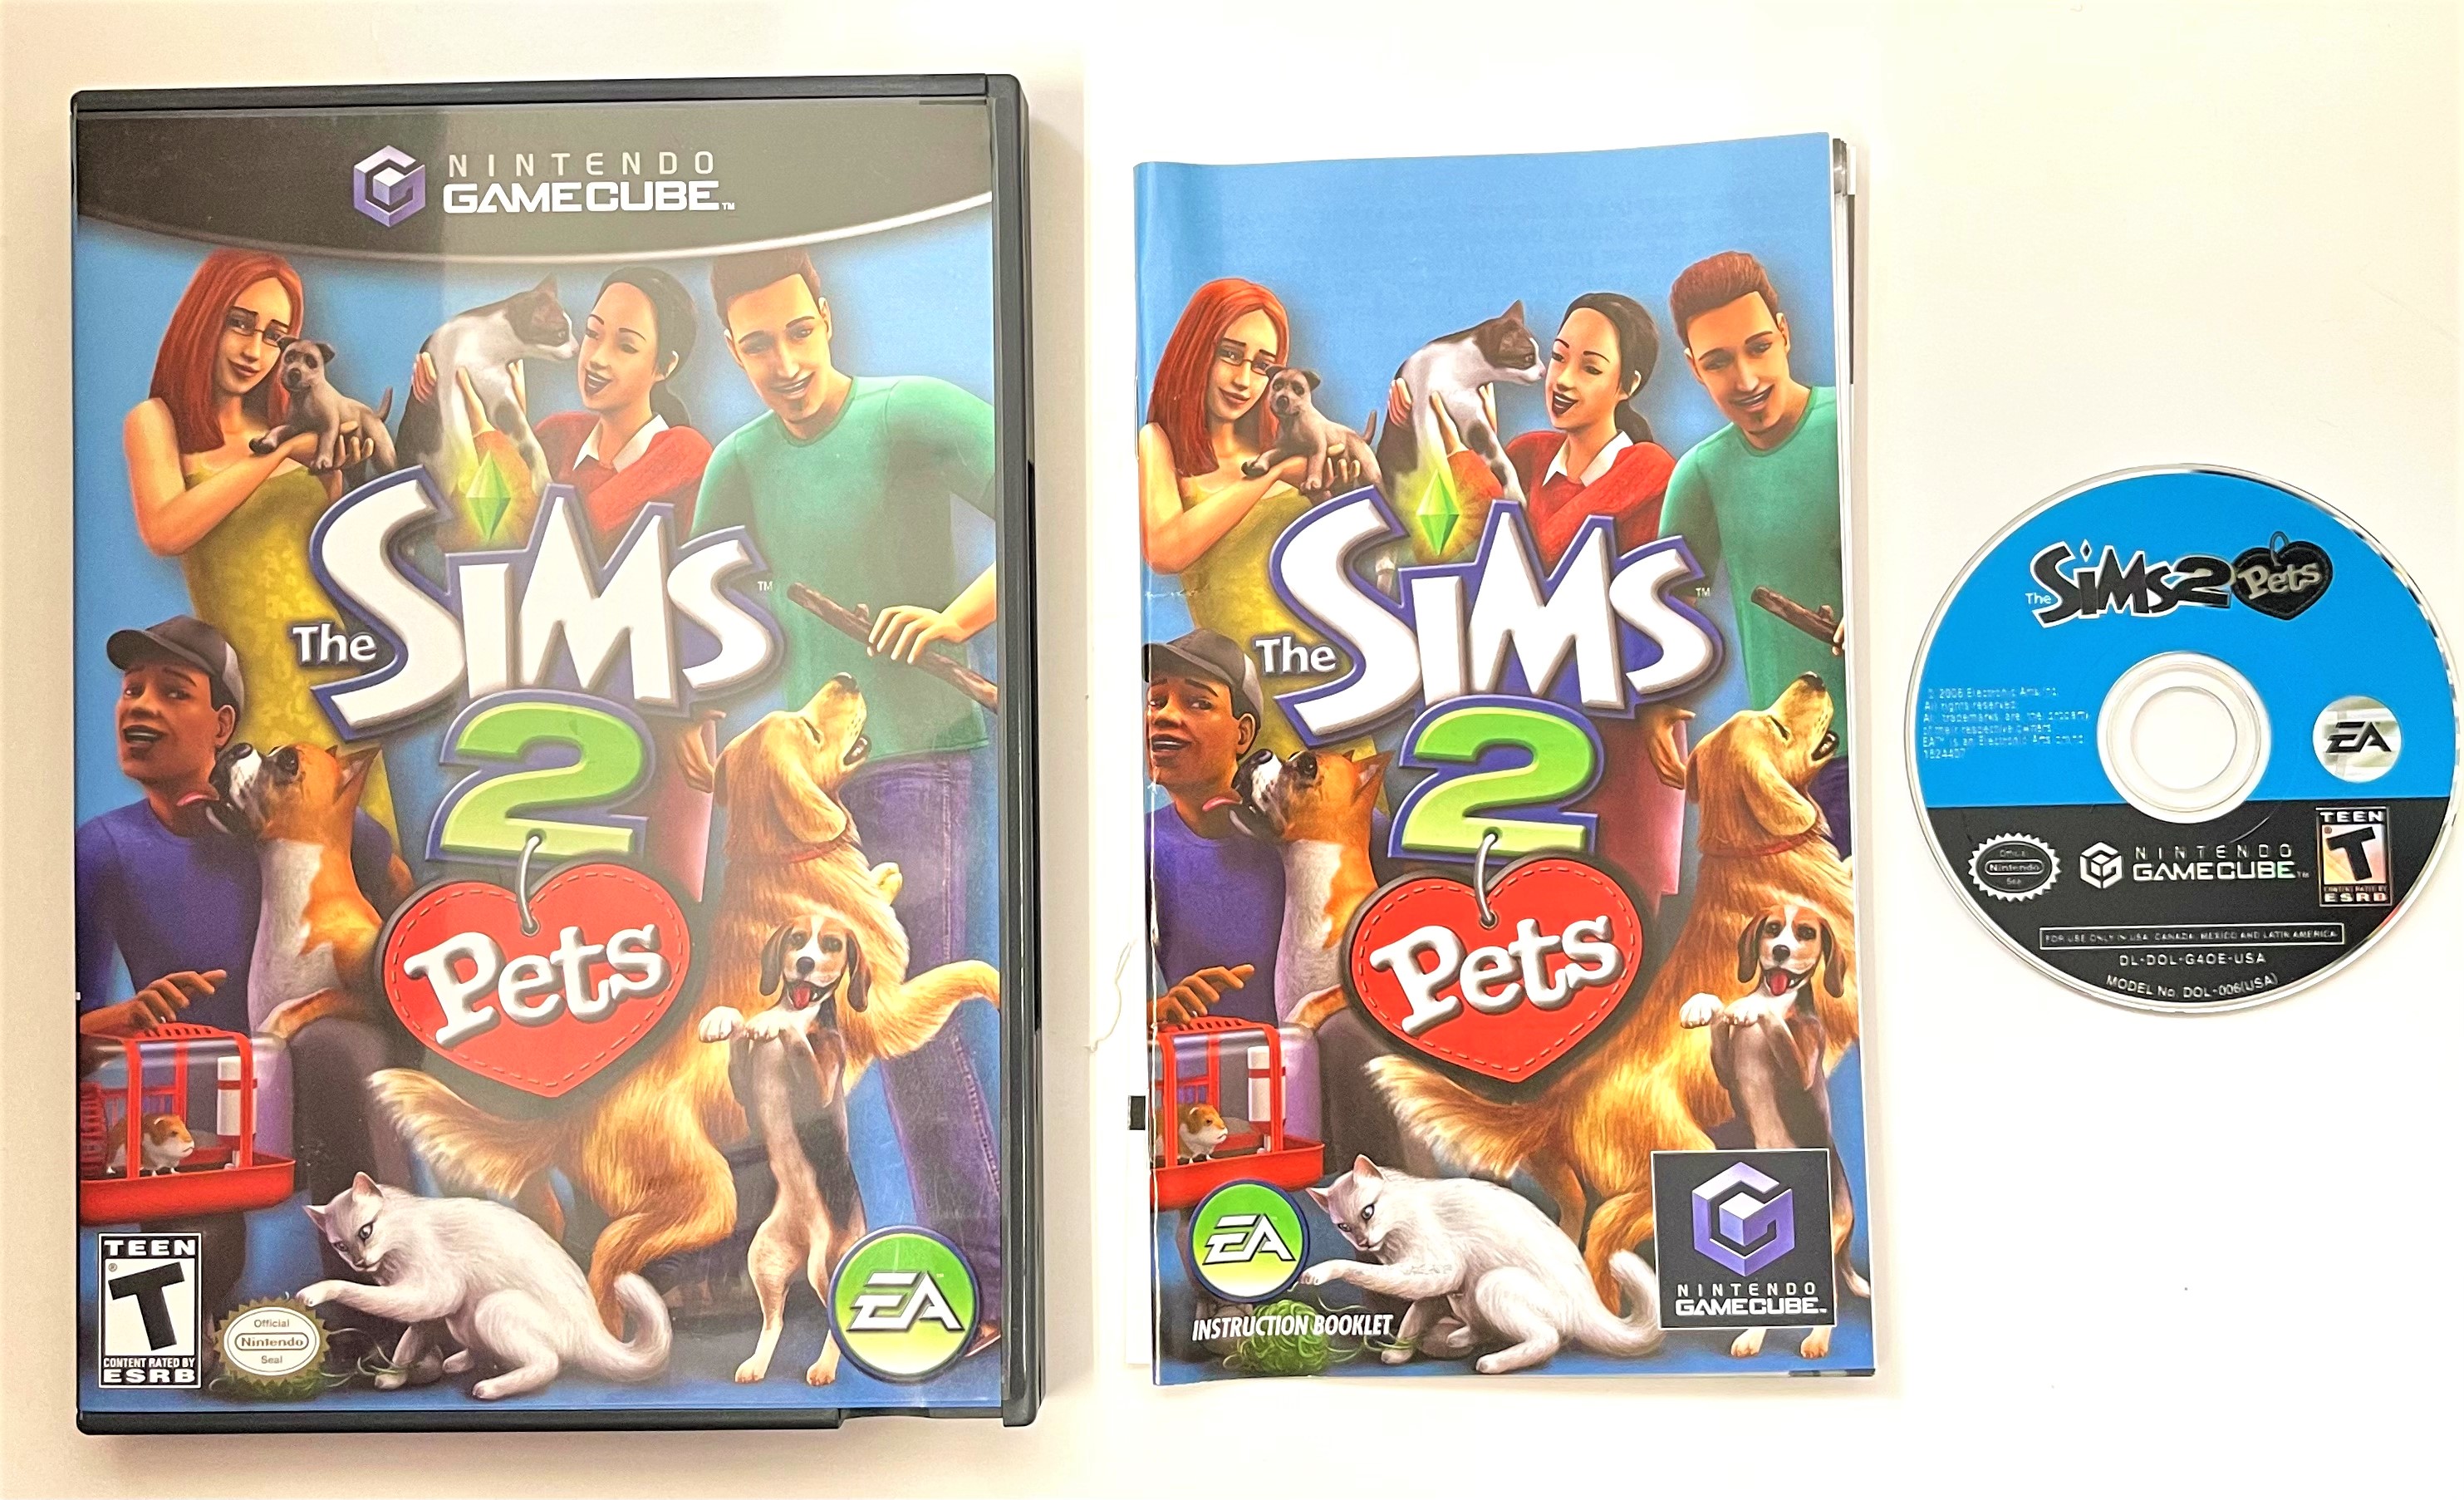 The Sims 2: Pets for Nintendo GameCube